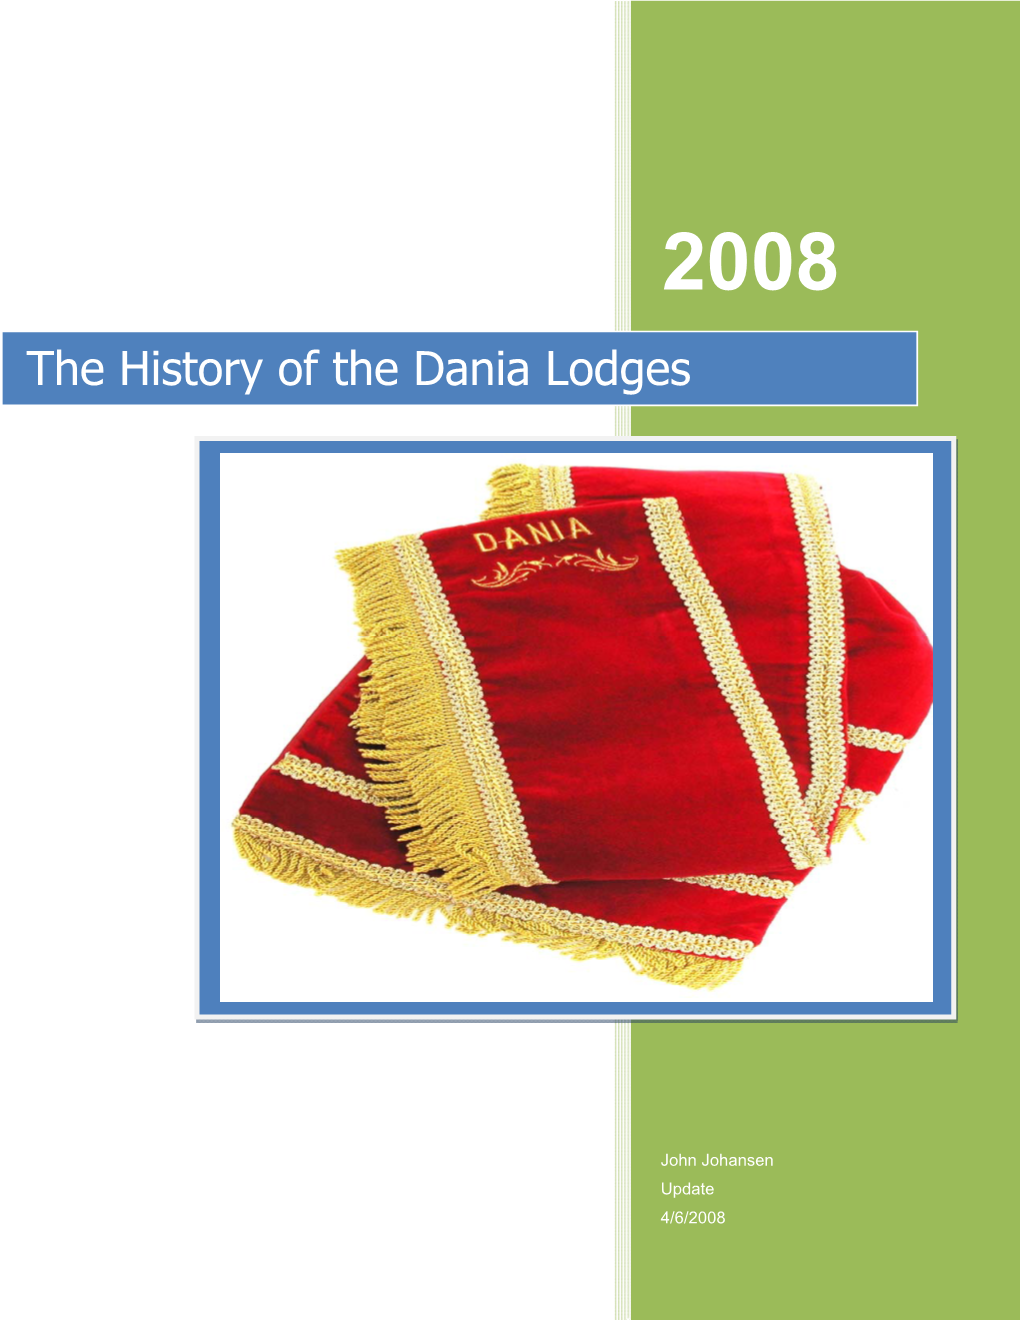 The History of the Dania Lodges